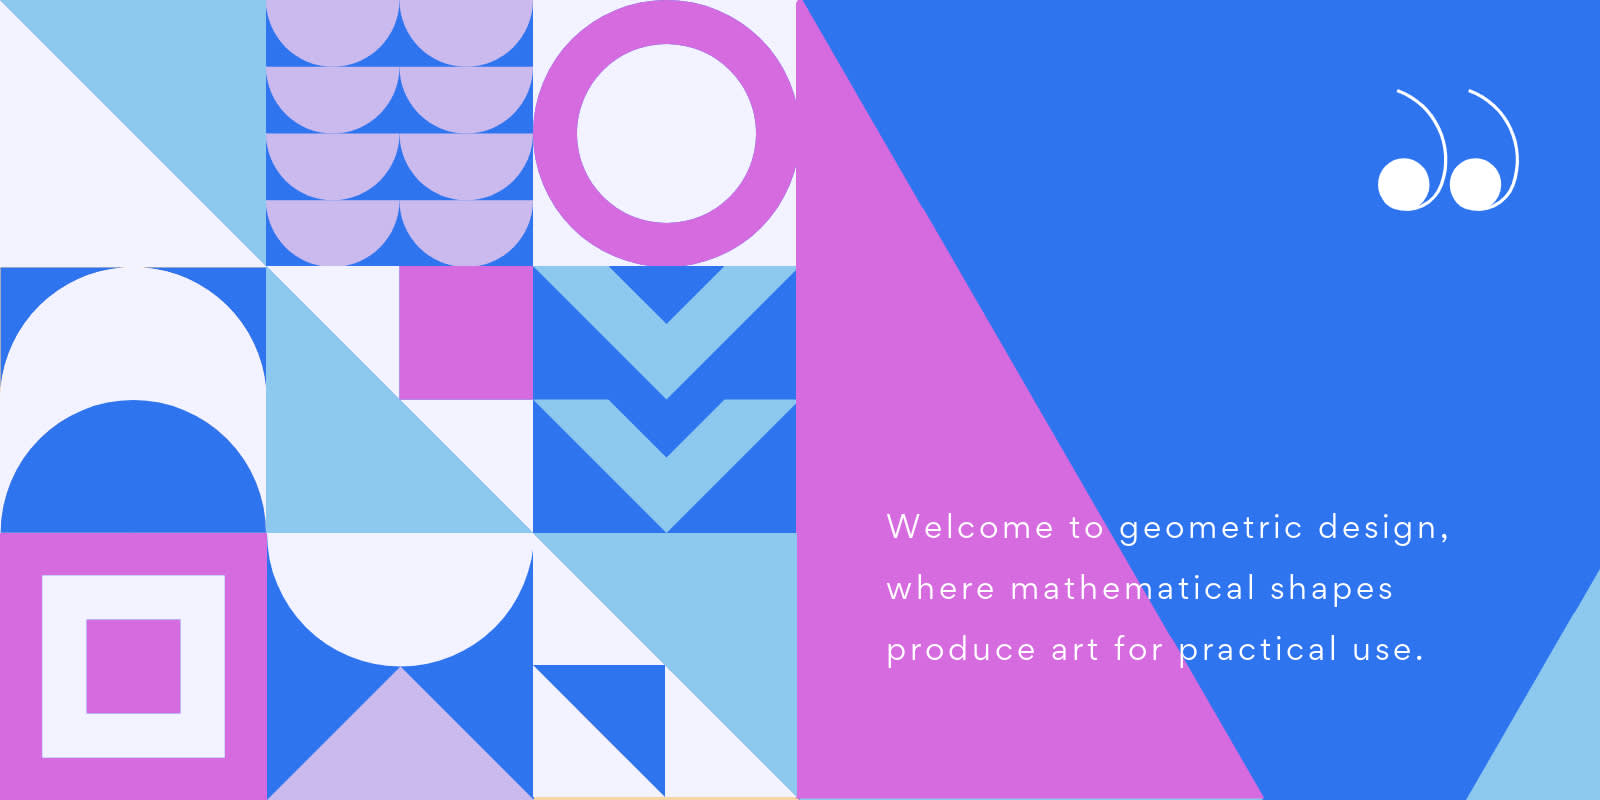 Design 101: Geometric Shapes & How to Use Them Creatively